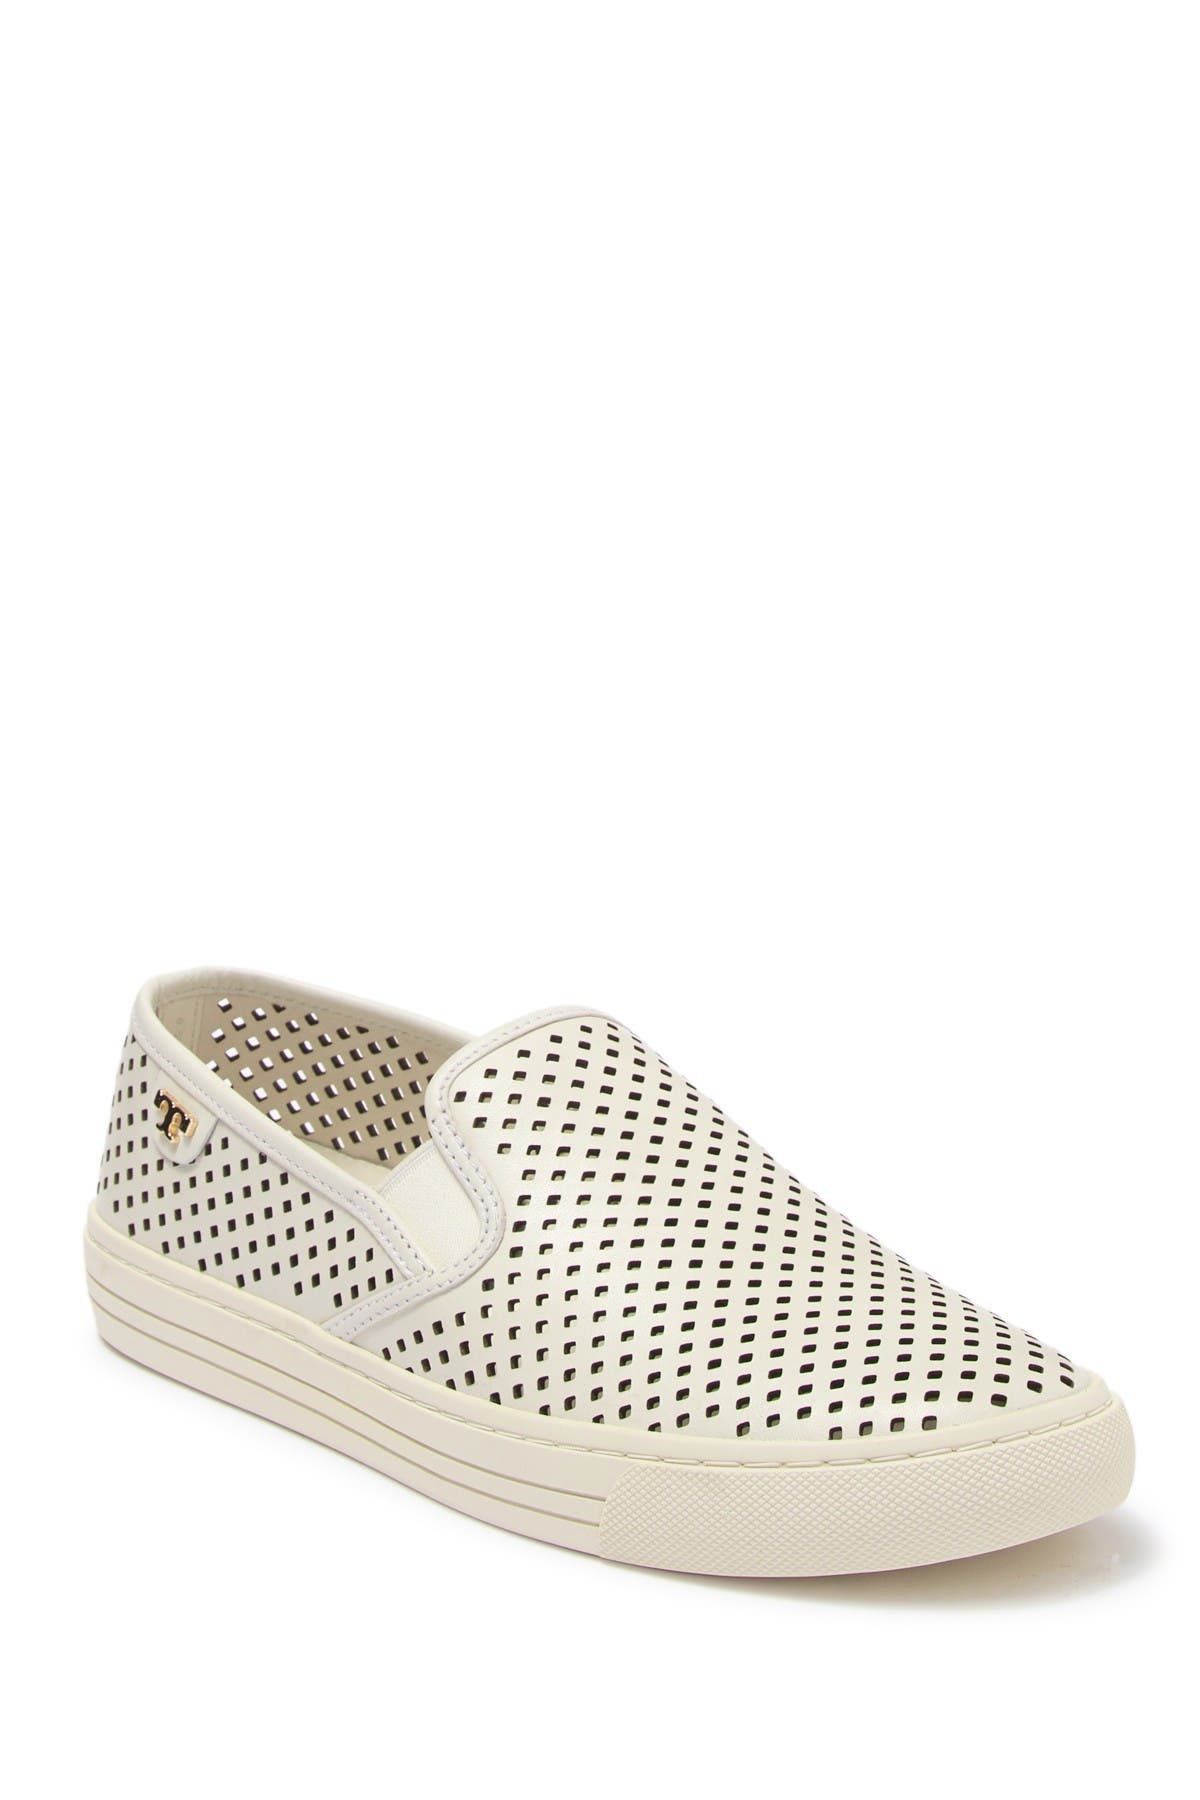 Tory Burch | Jesse Perforated Leather 